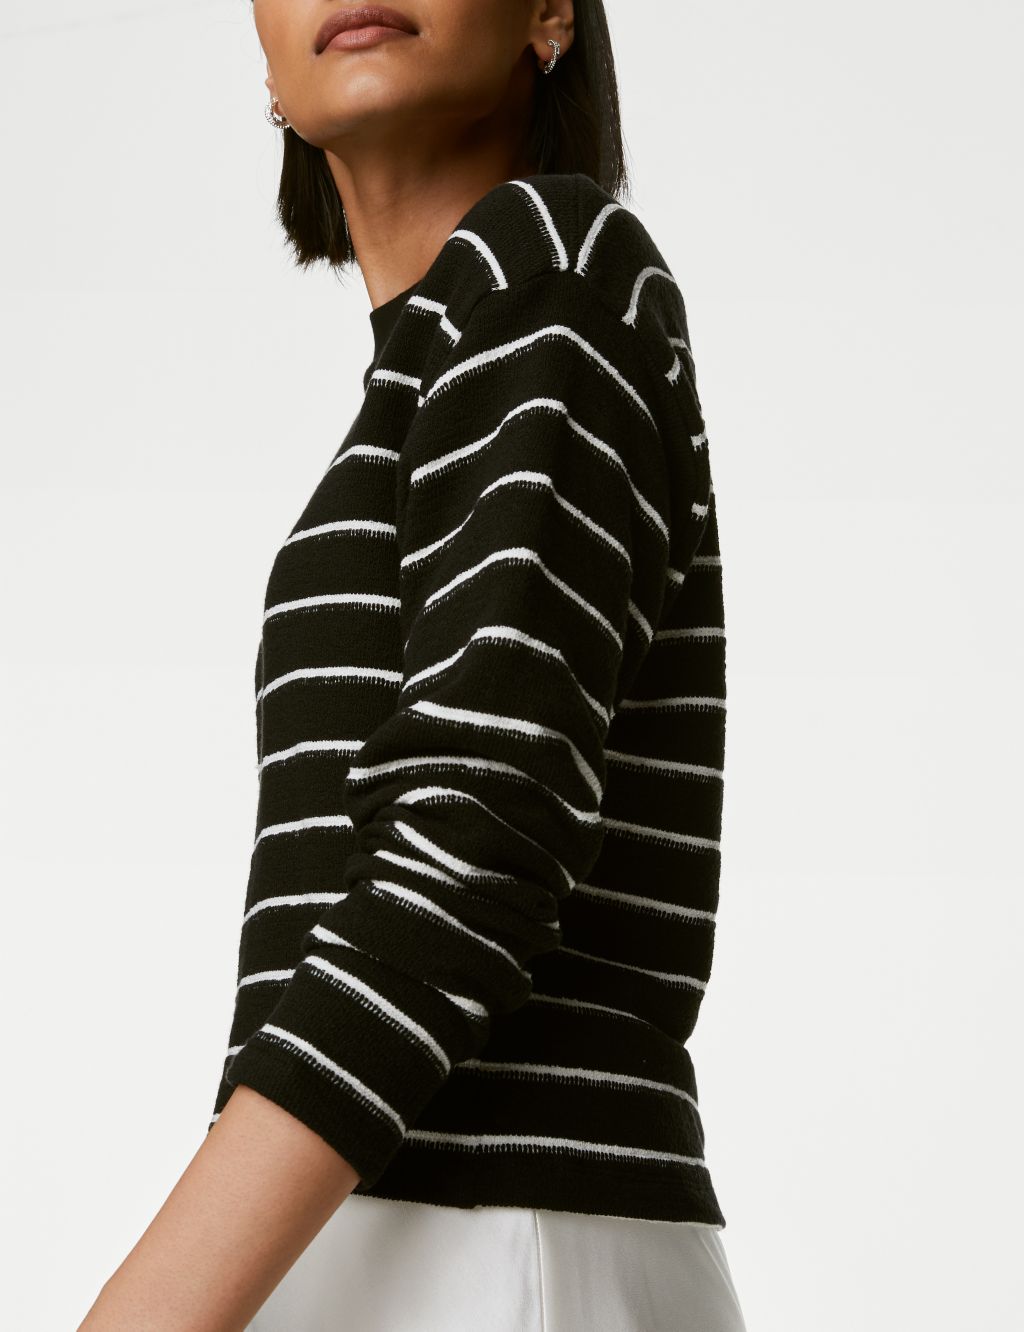 Cotton Rich Textured Striped Top image 4